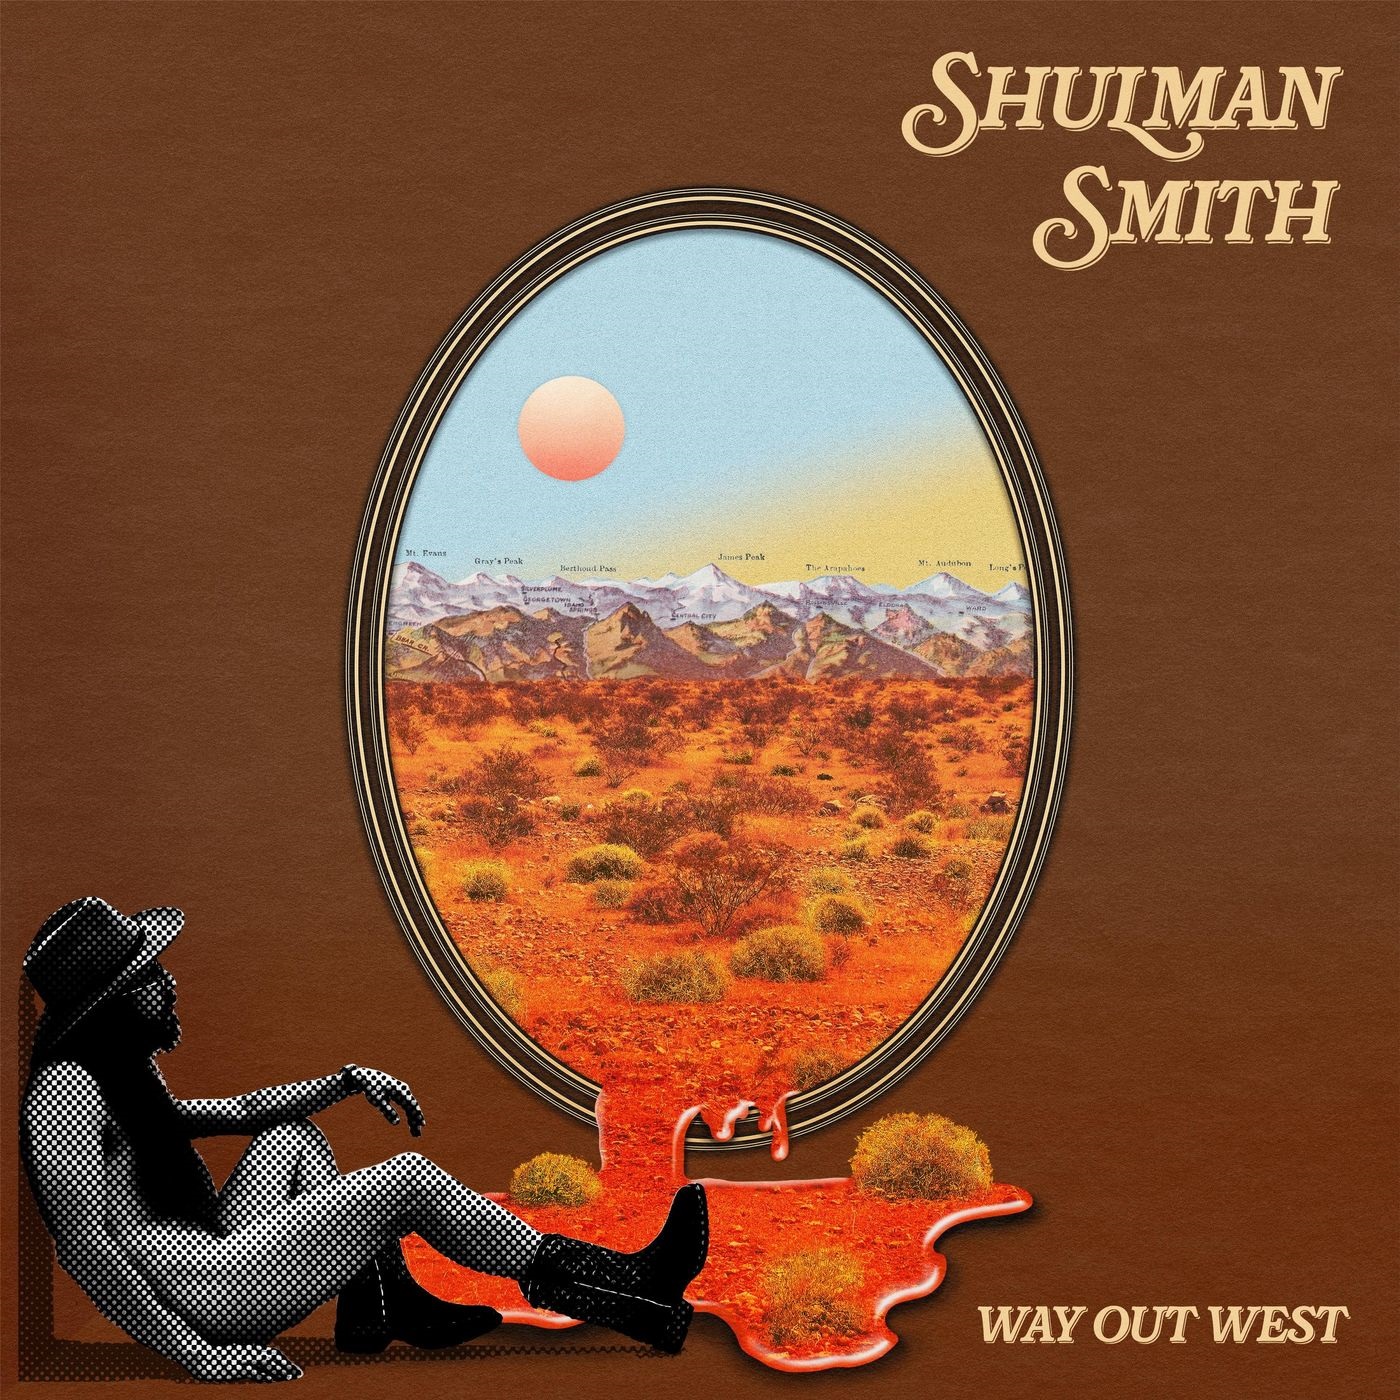 HERPOST - Shulman Smith - 2021 - Way Out West